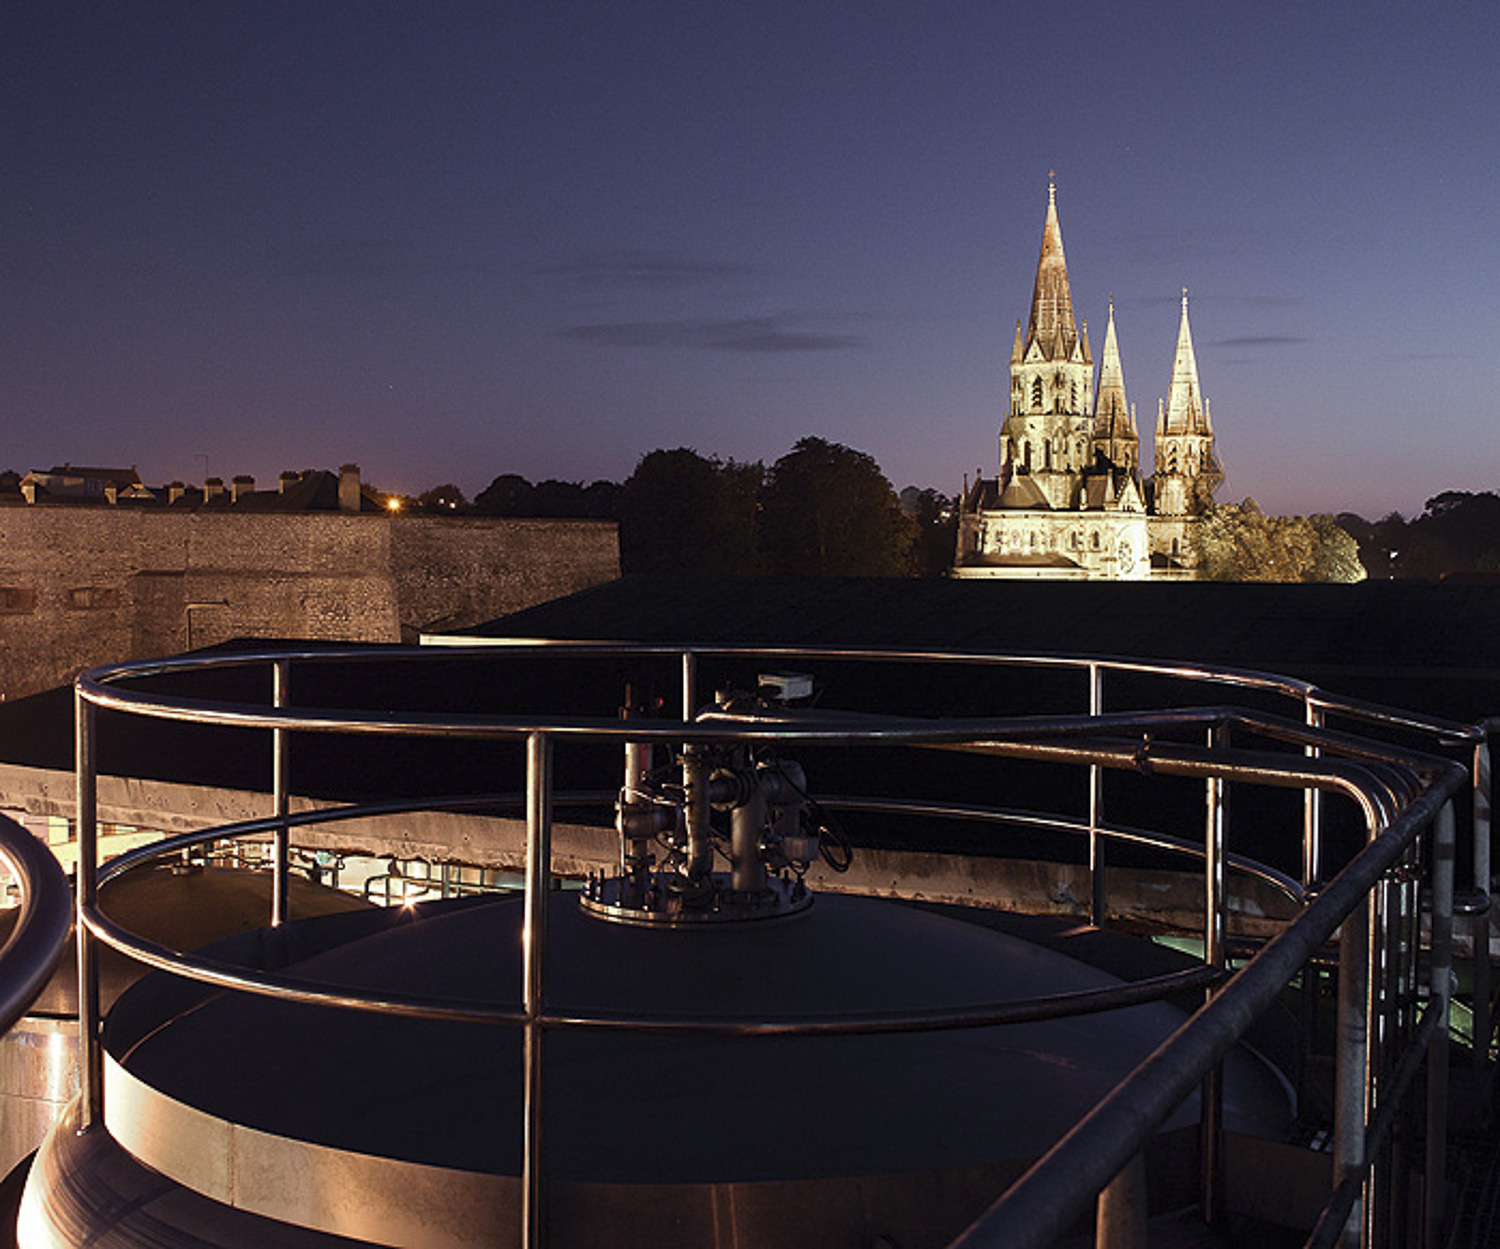 A view of Saint Fin Barre's Cathedral from the top of the Tanker Bay Tanks.